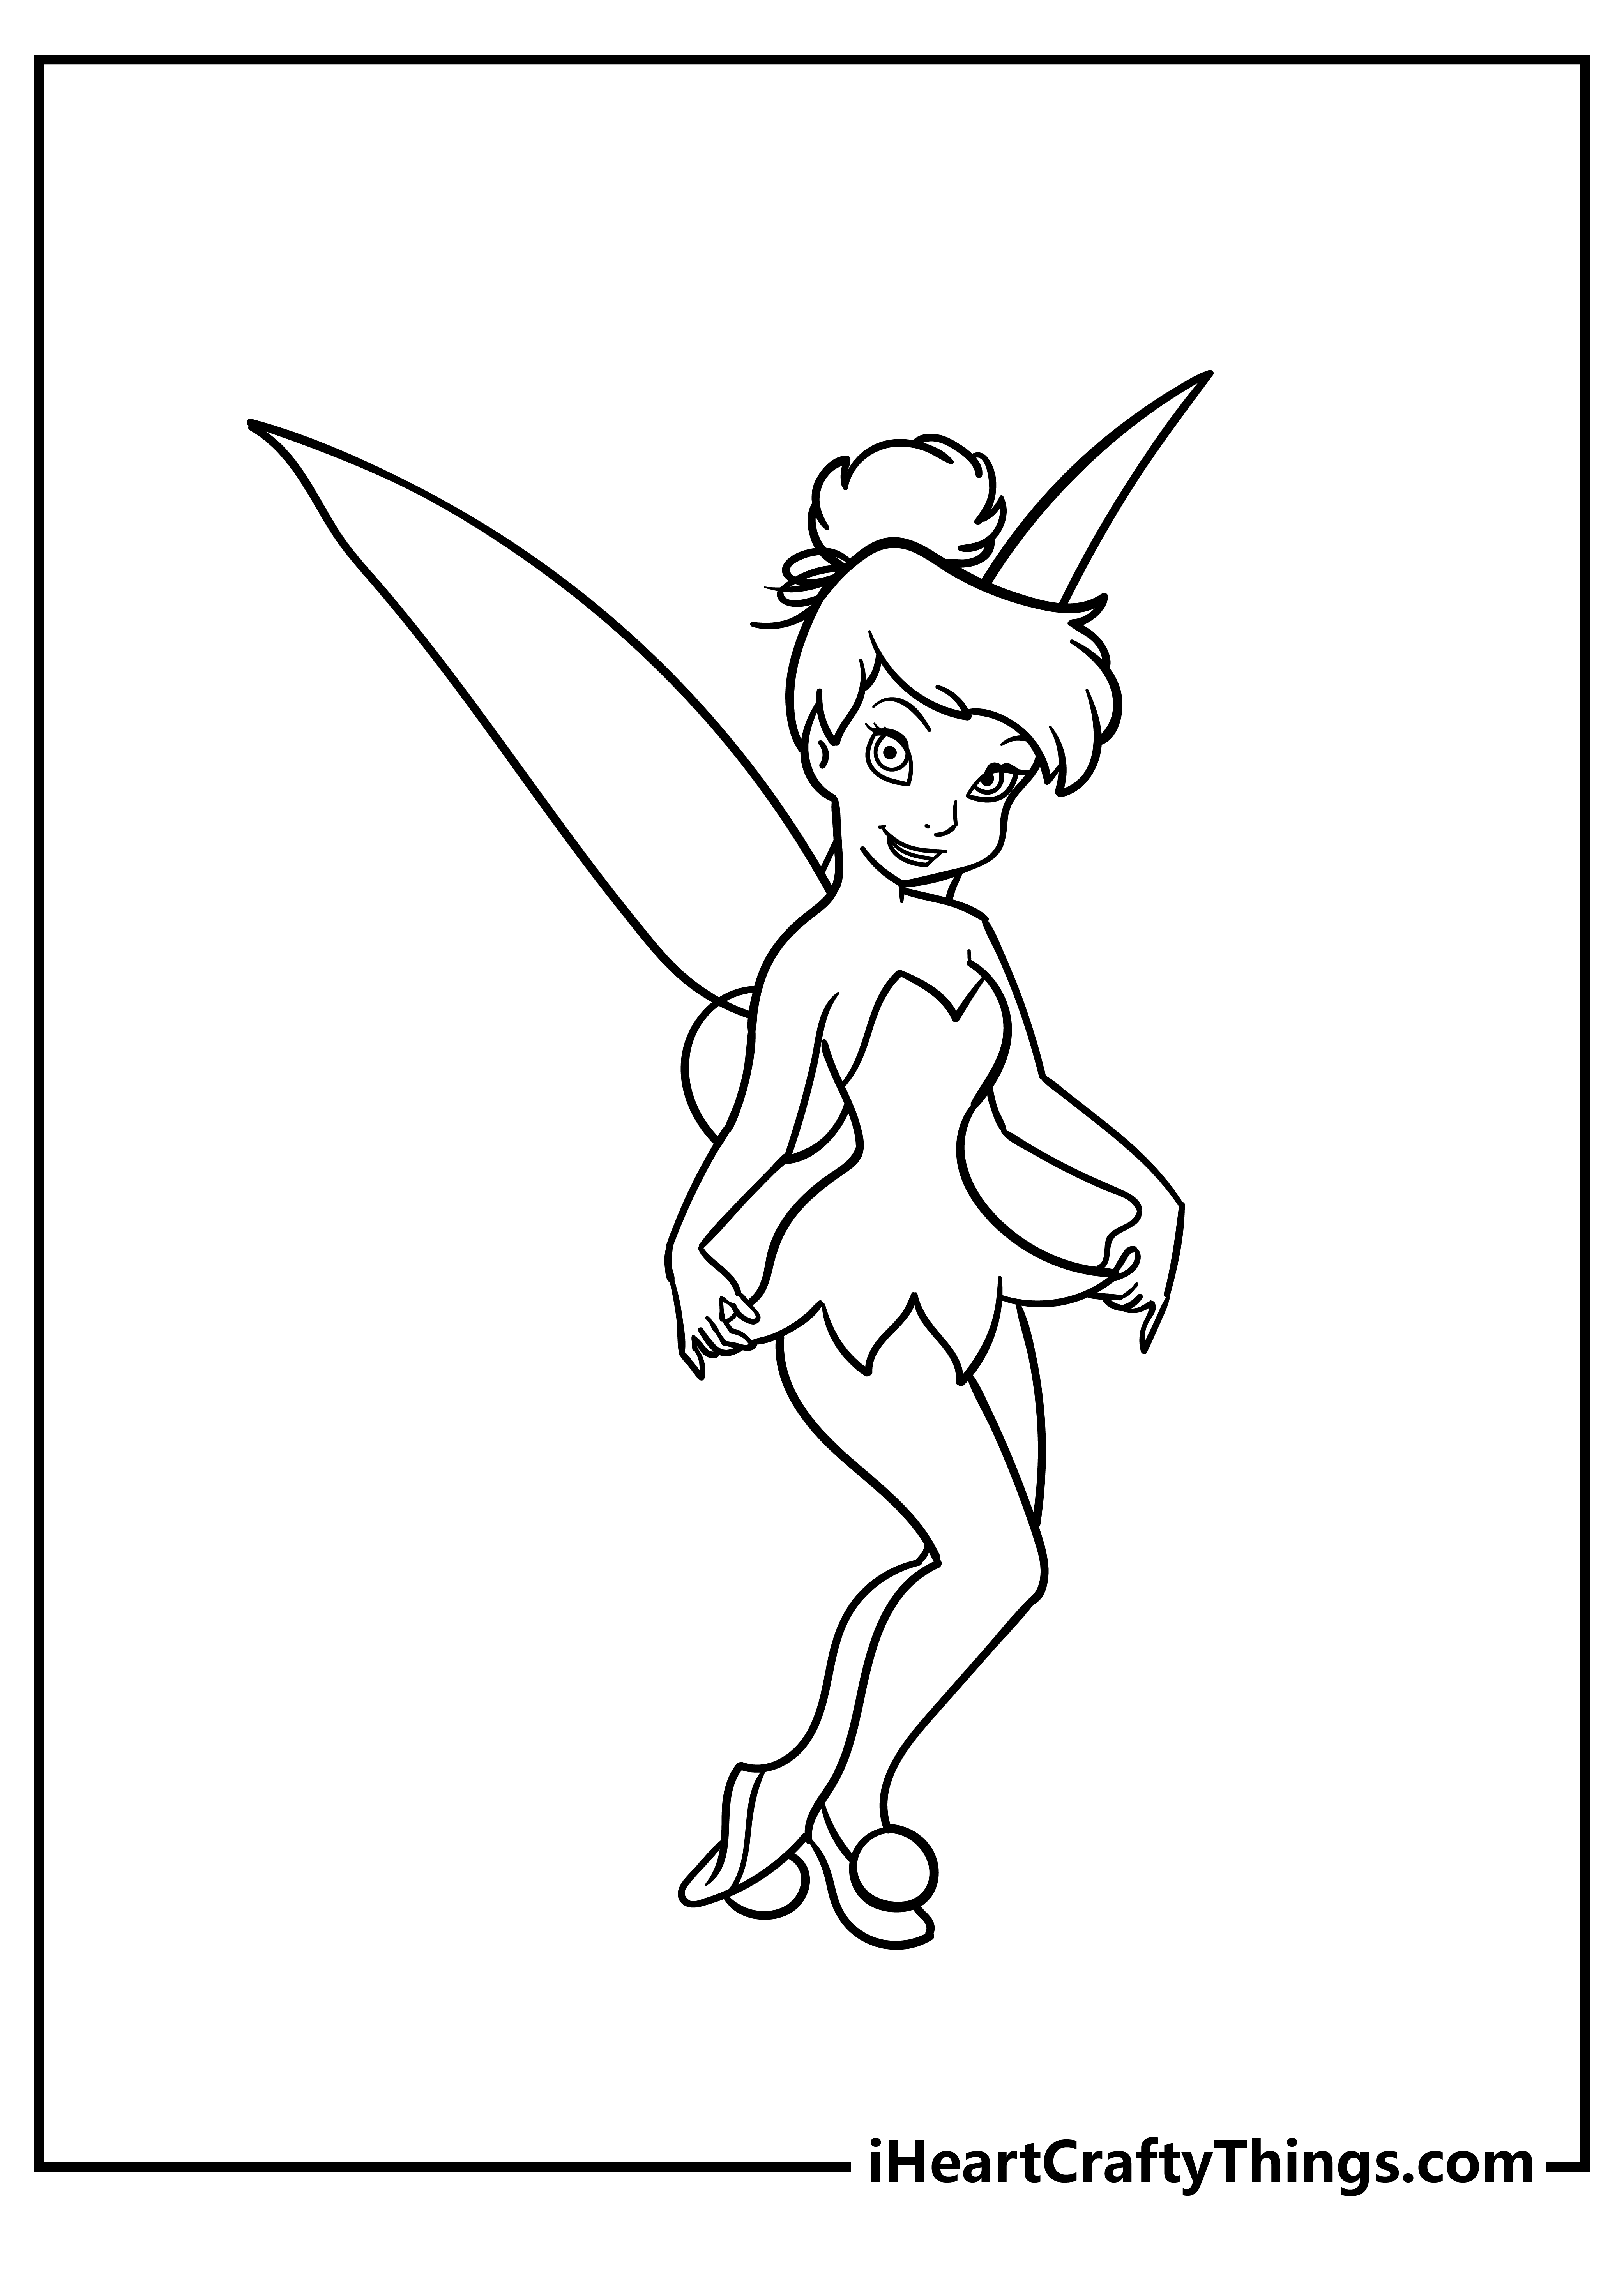 Tinkerbell Coloring Pages for adults free printable